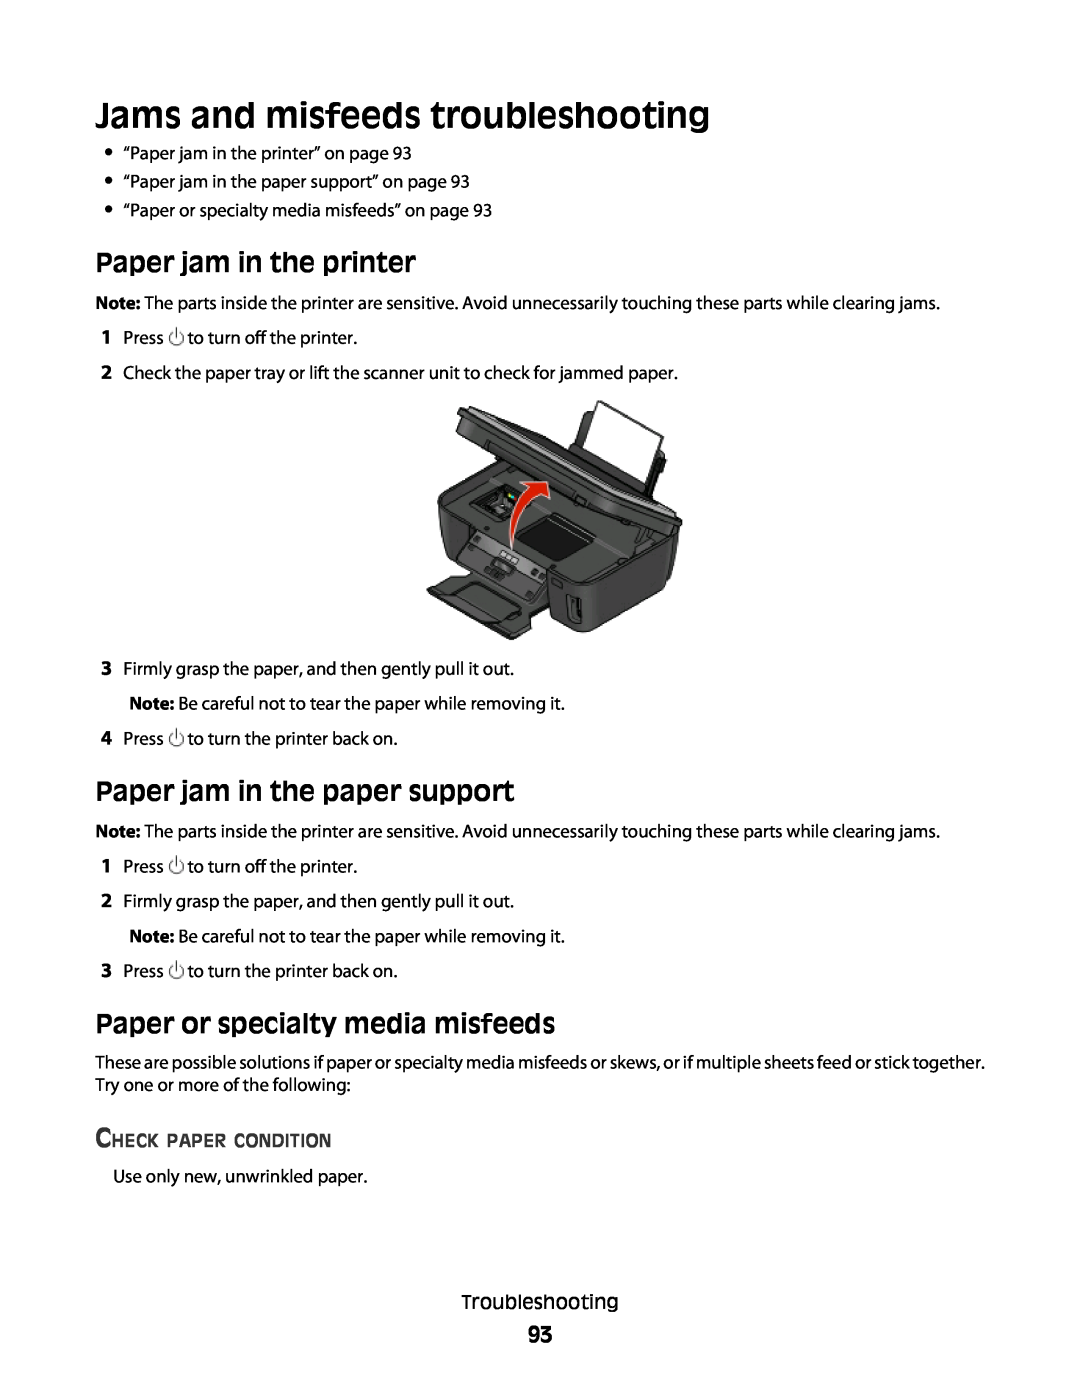 Lexmark 10E, 101 manual Jams and misfeeds troubleshooting, Paper jam in the printer, Paper jam in the paper support 